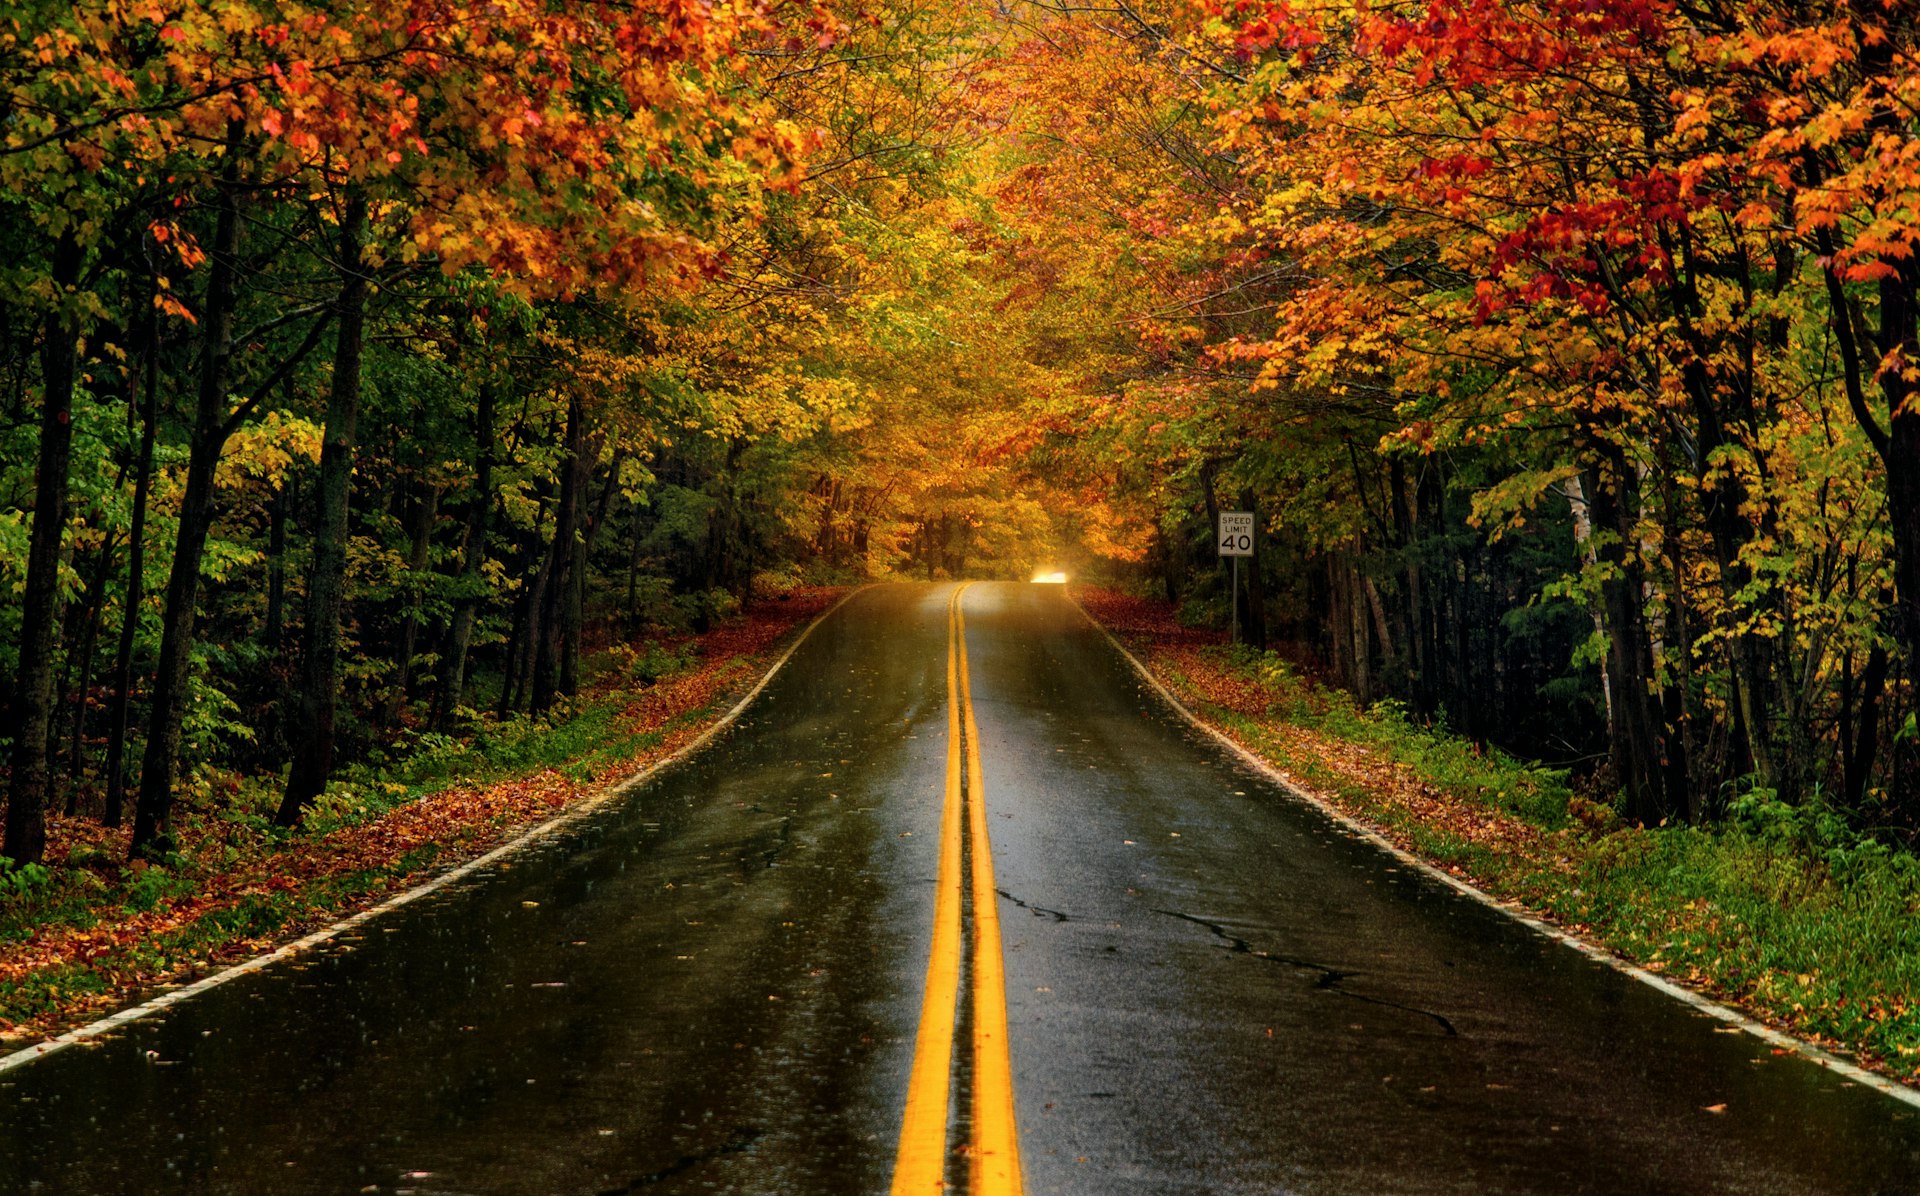 Colorful fall foliage surrounding a car-free road in Vermont